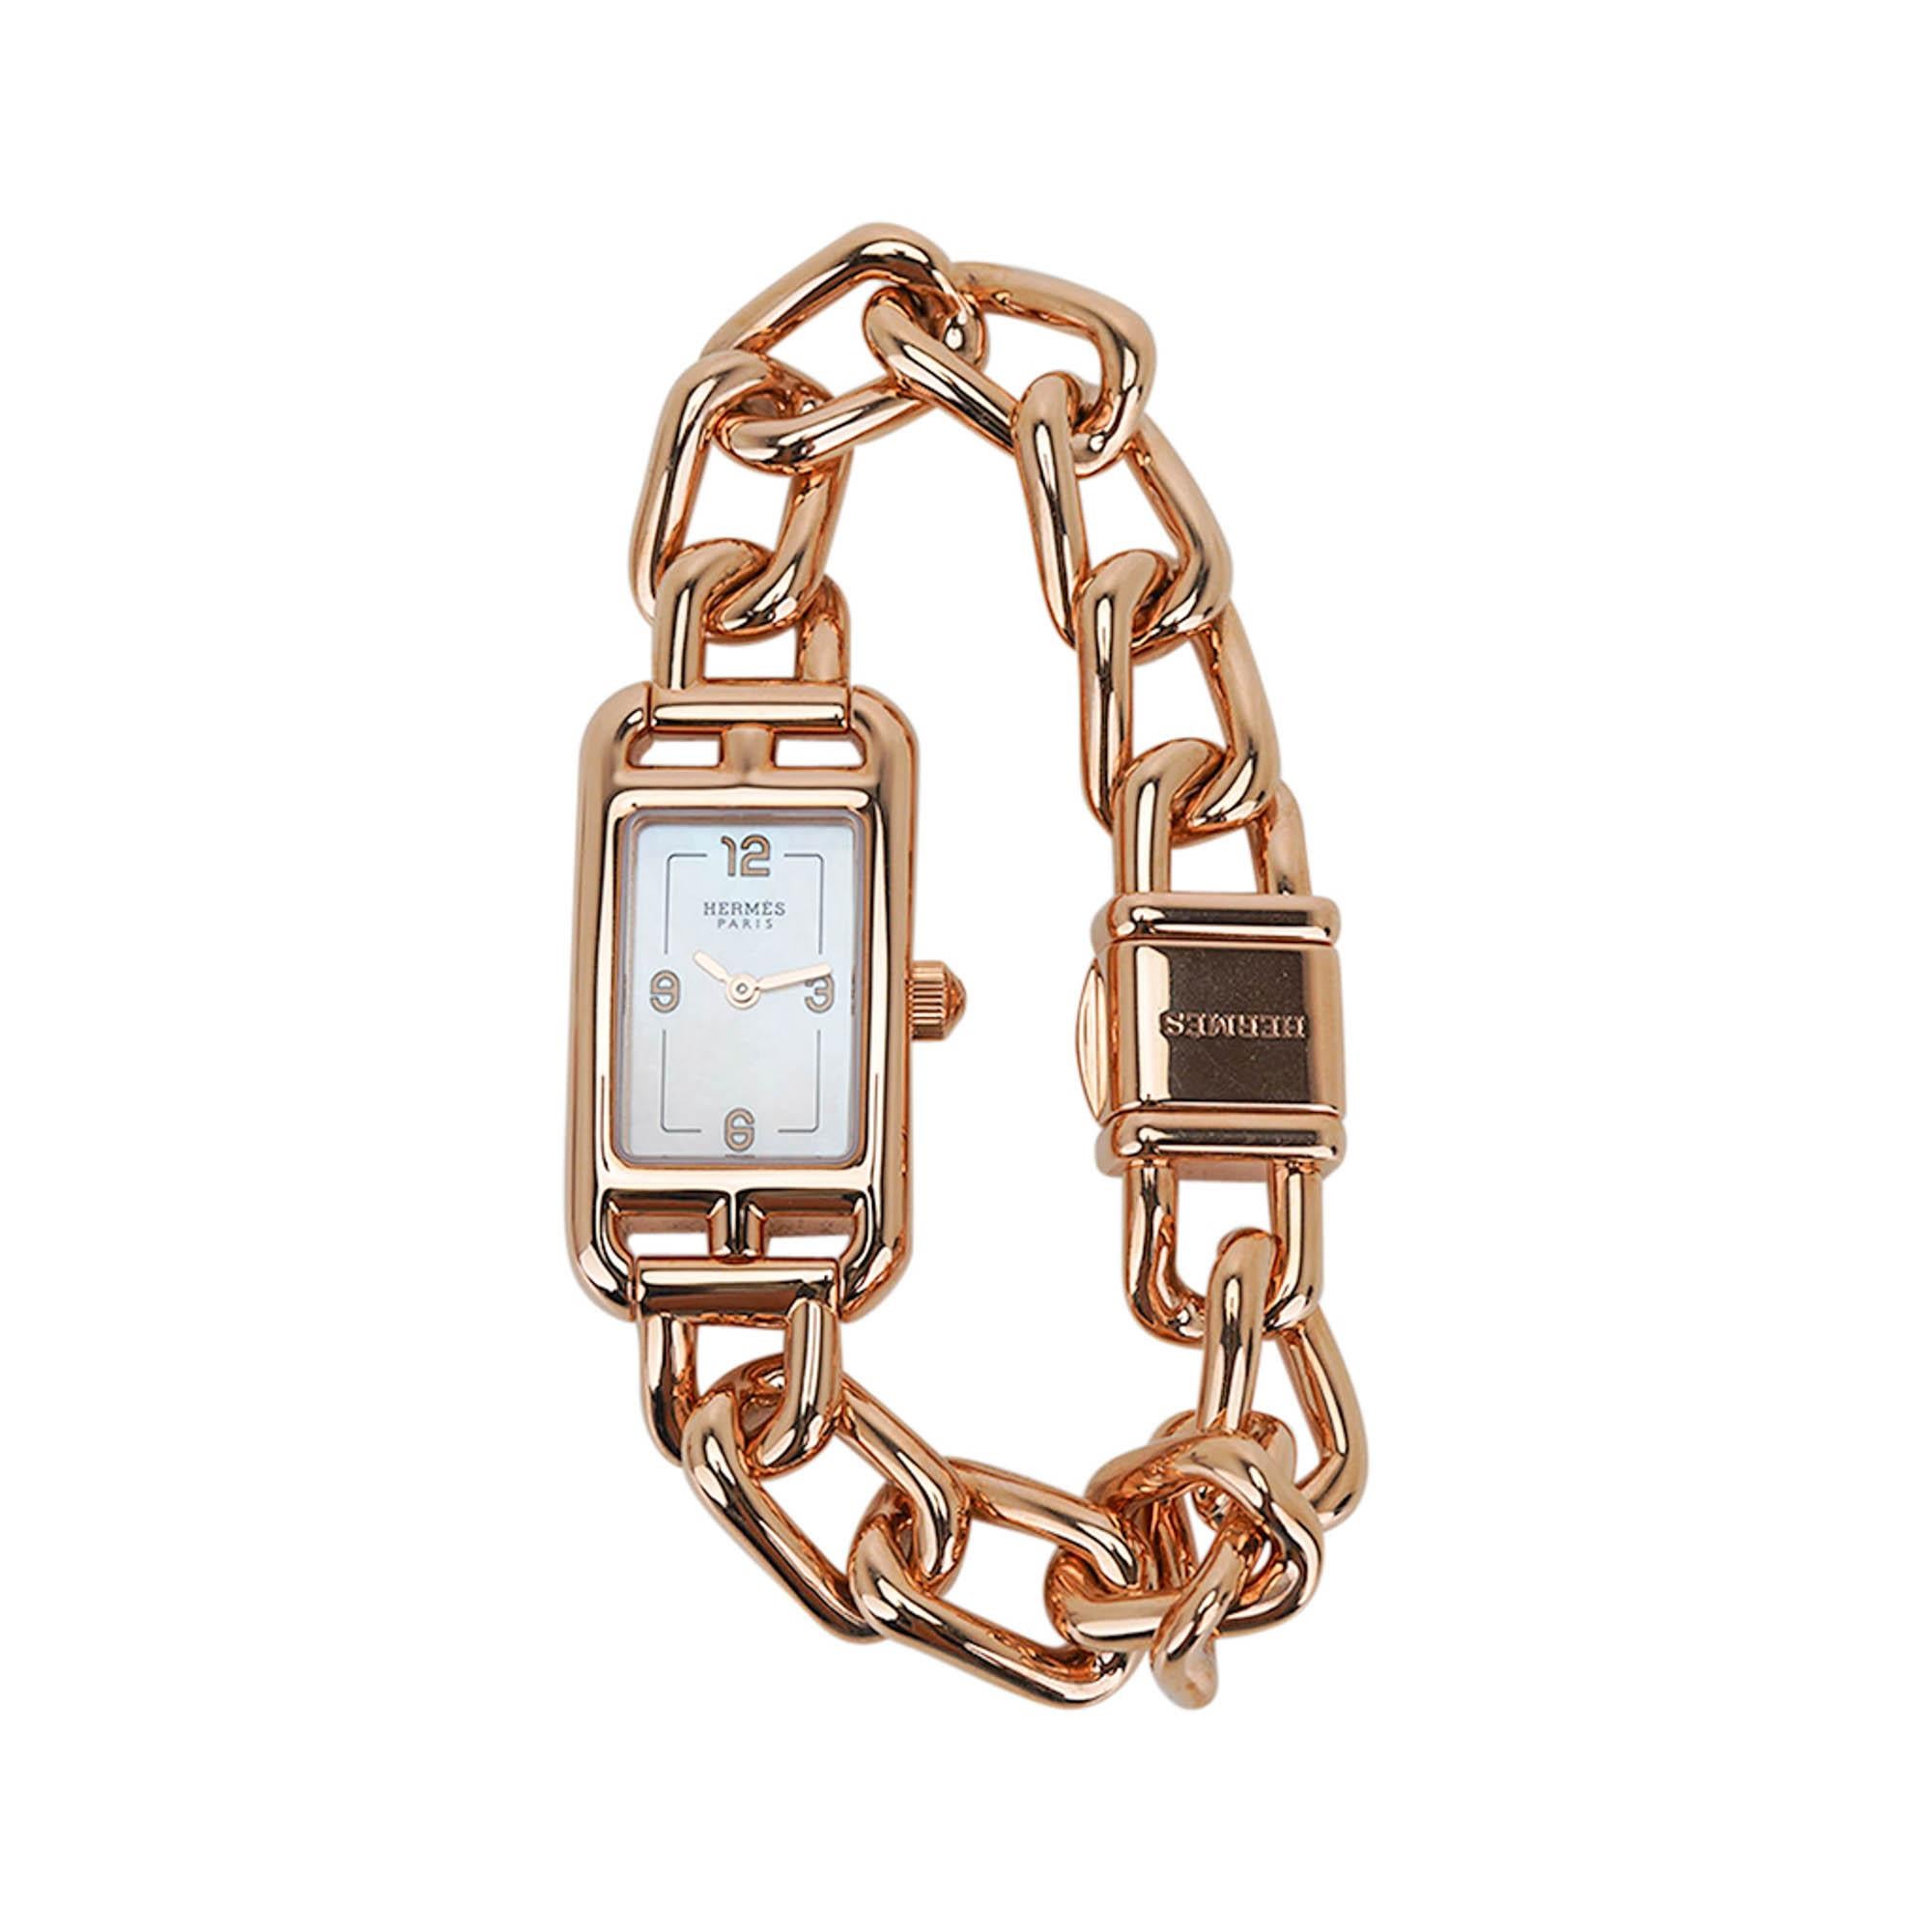 Brilliant Cut Hermes Watch Nantucket Rose Gold 18k Small Model For Sale